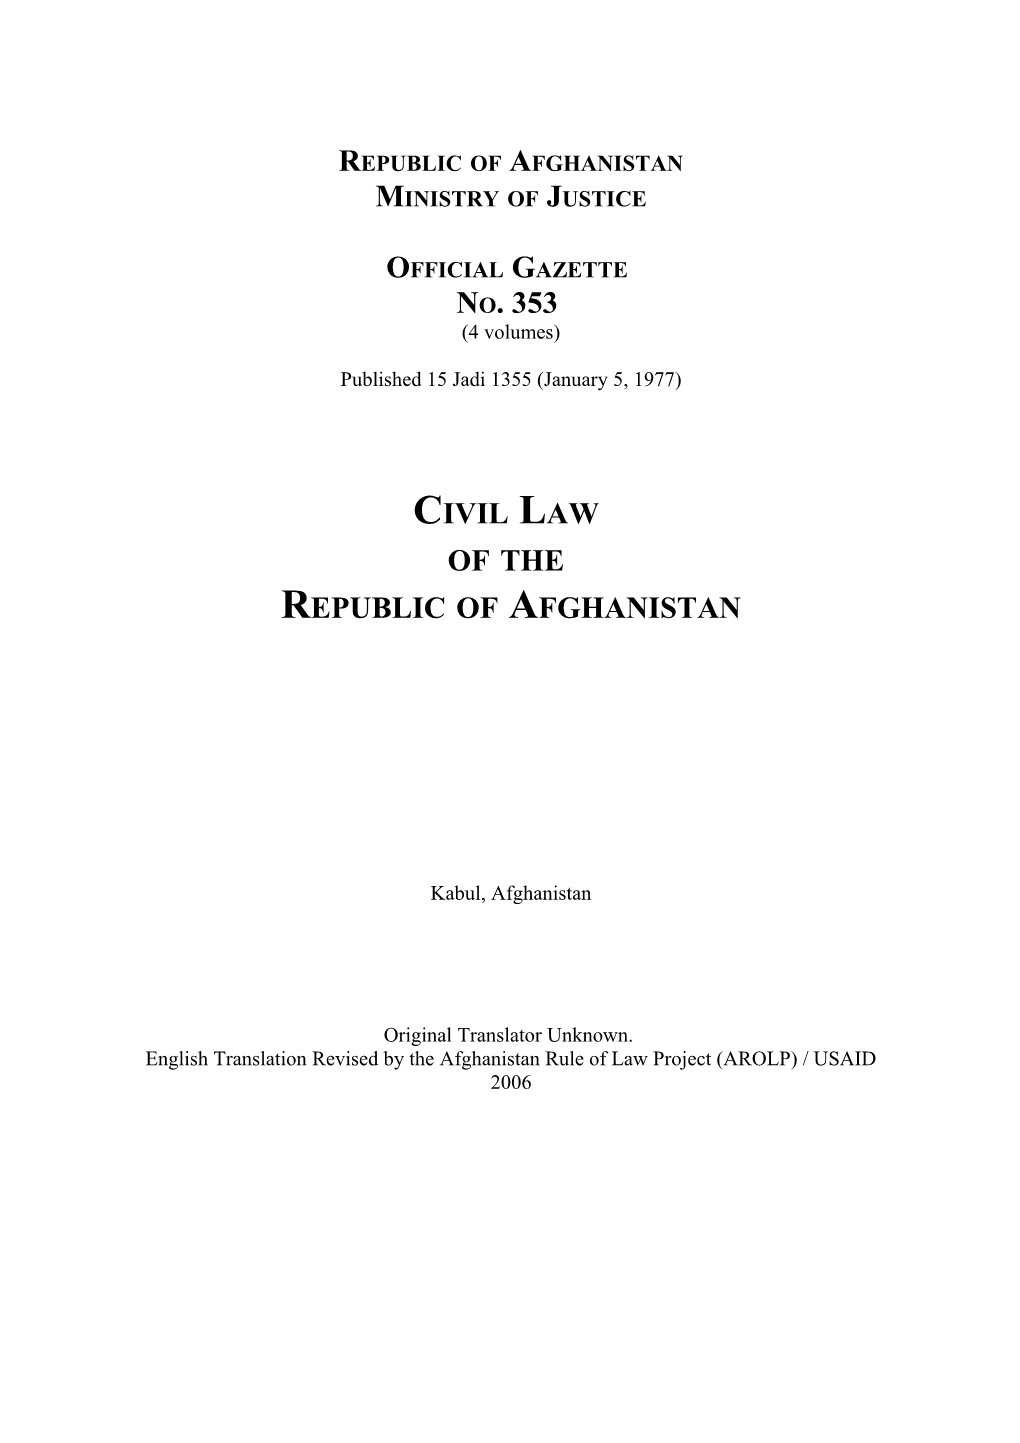 The Civil Law of the Republic of Afghanistan